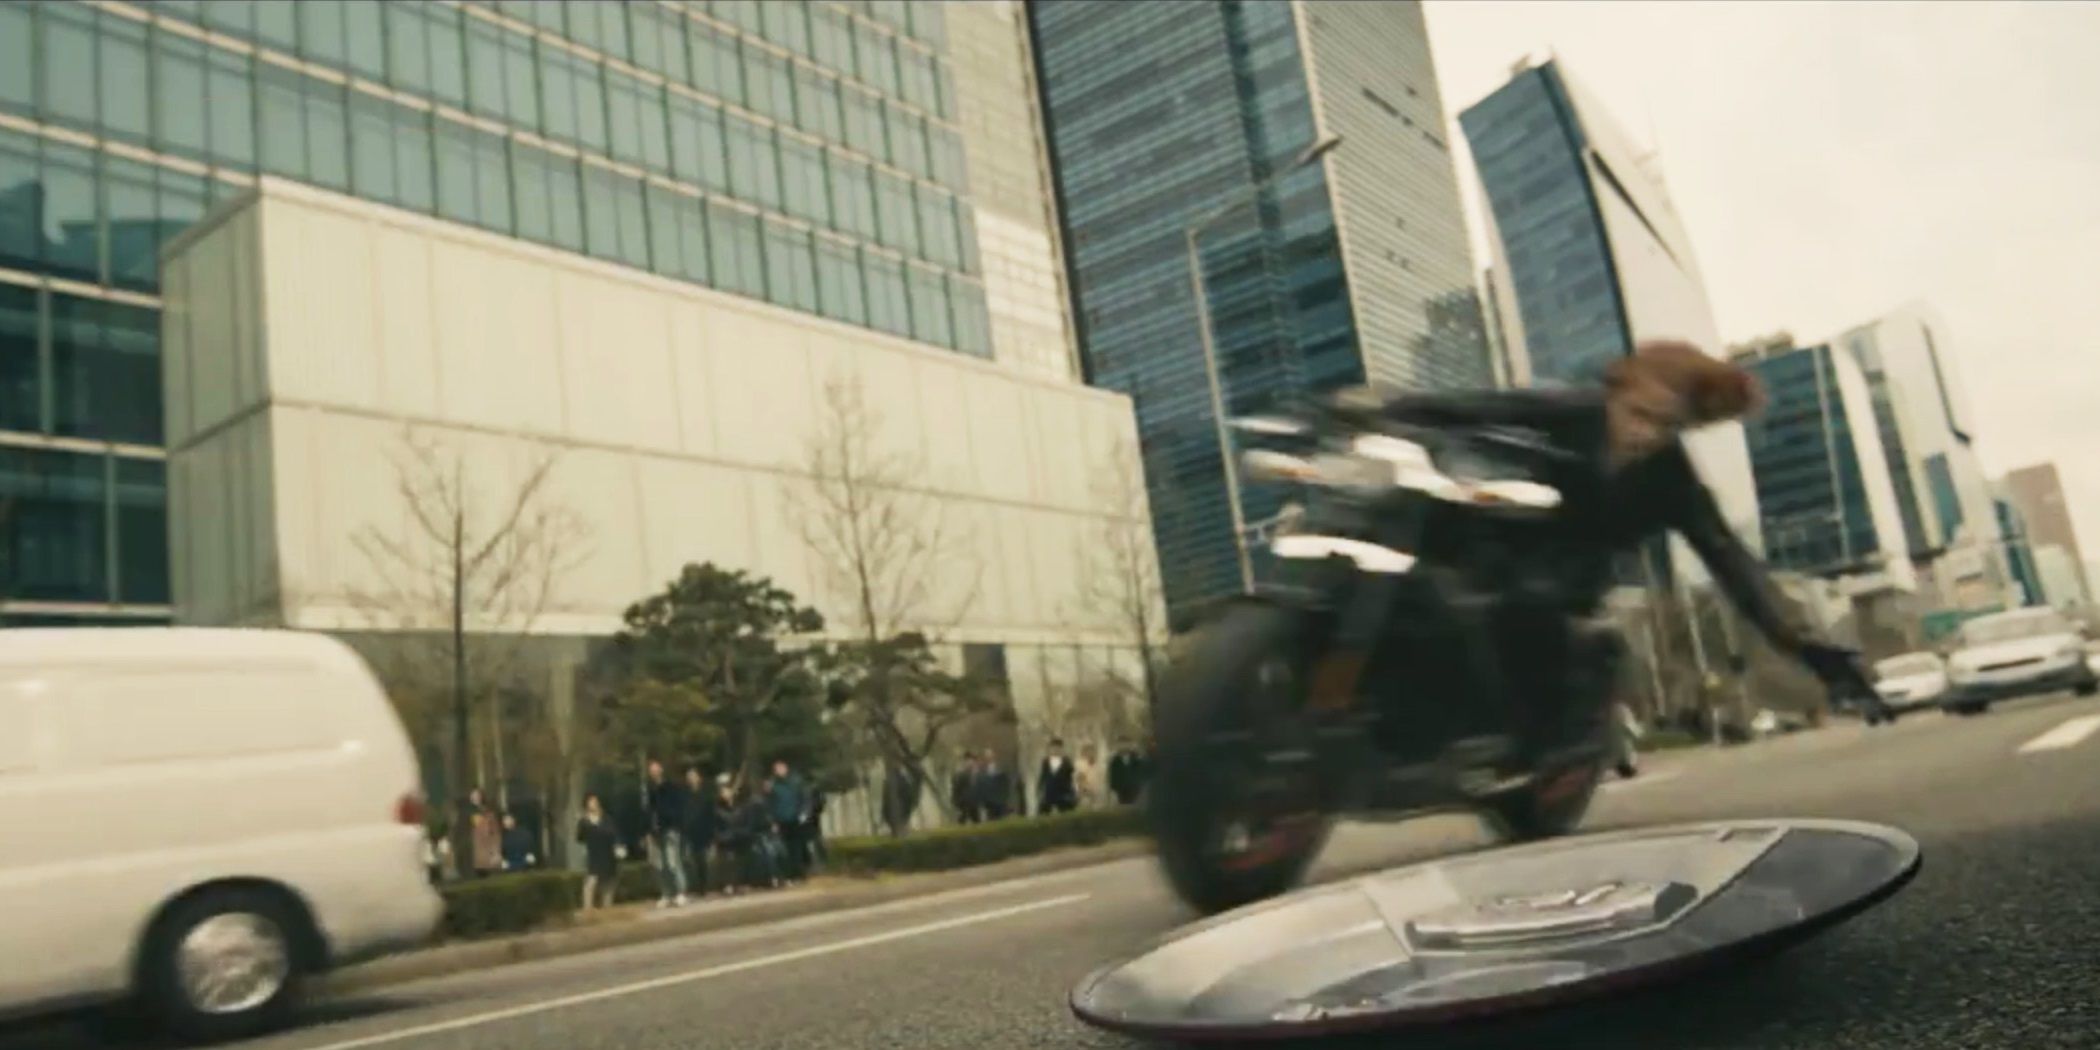 Black Widow picks up Captain America's shield on her motorcycle in Avengers: Age Of Ultron